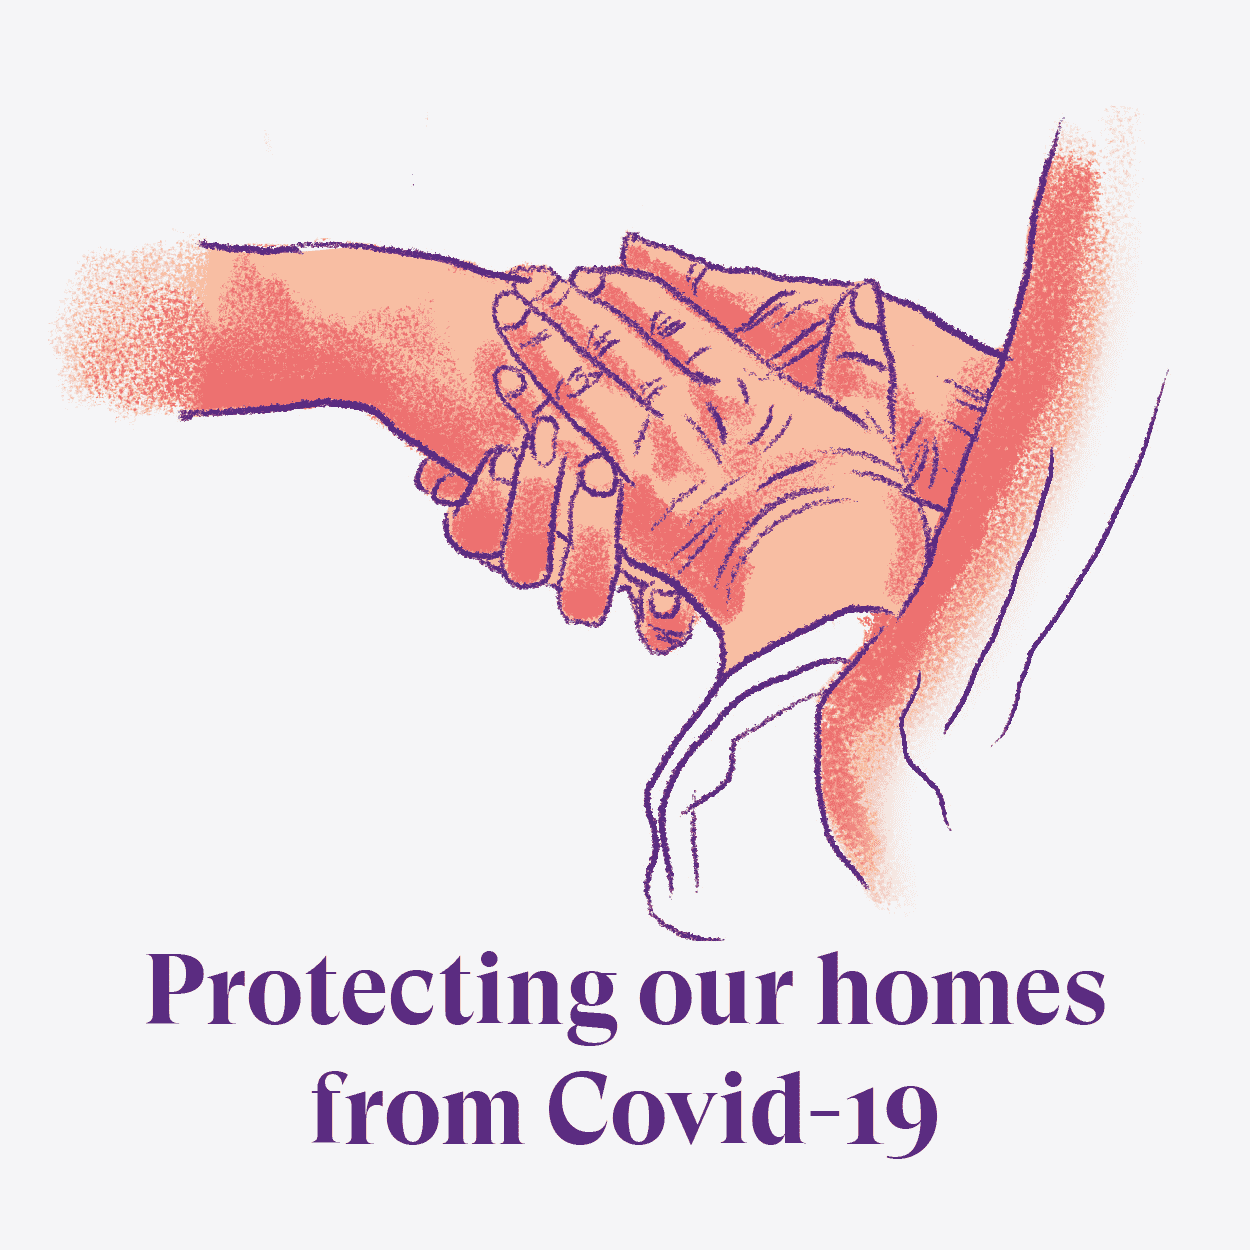 Protecting our homes from Covid-19